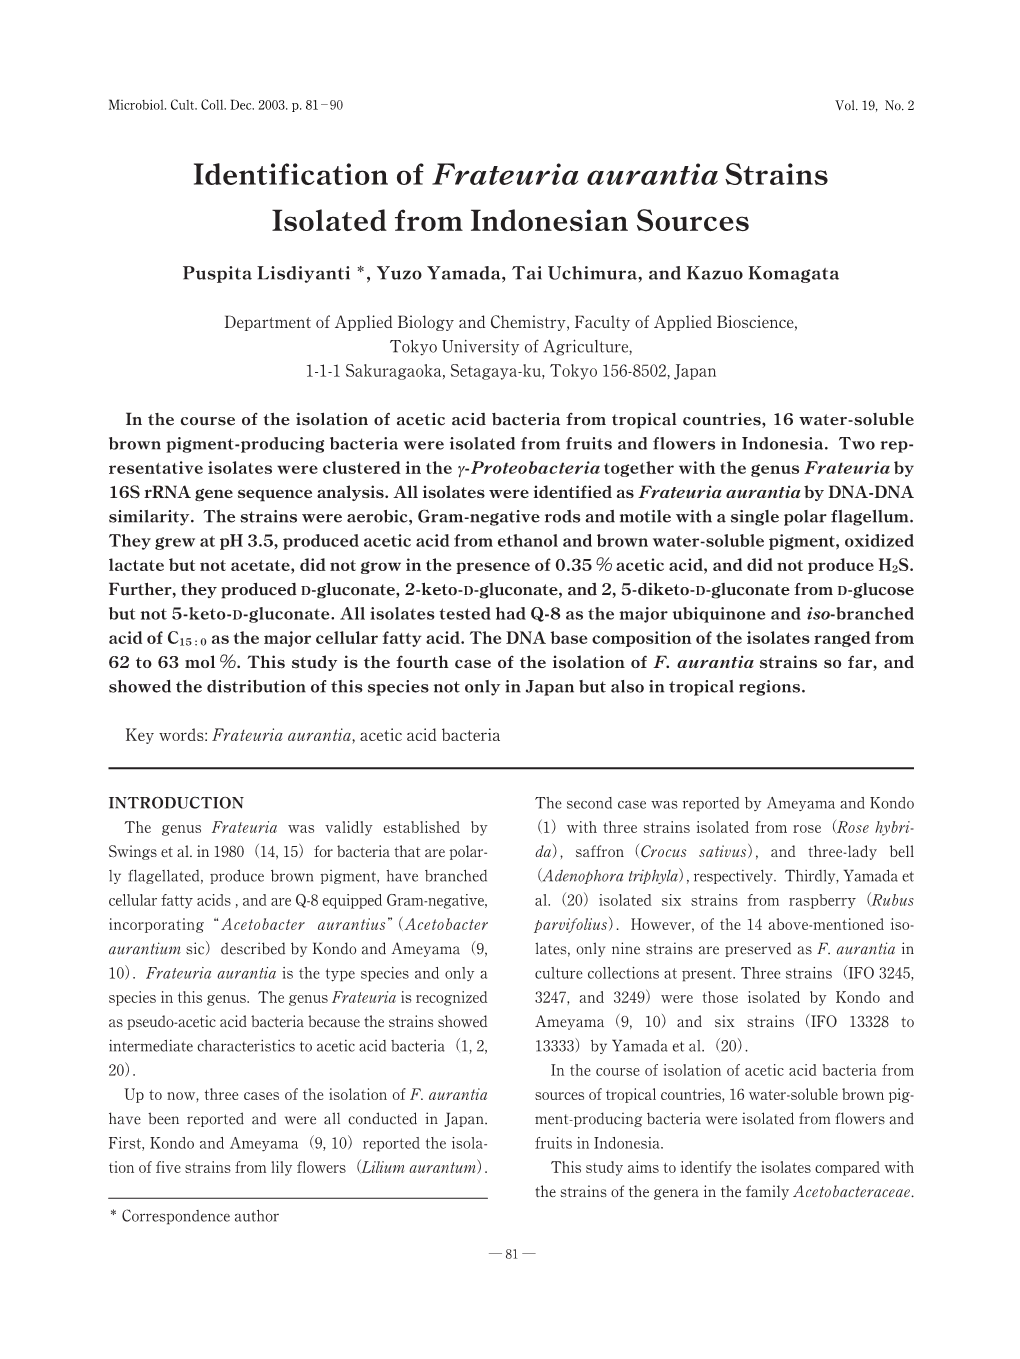 Identification of Frateuria Aurantia Strains Isolated from Indonesian Sources